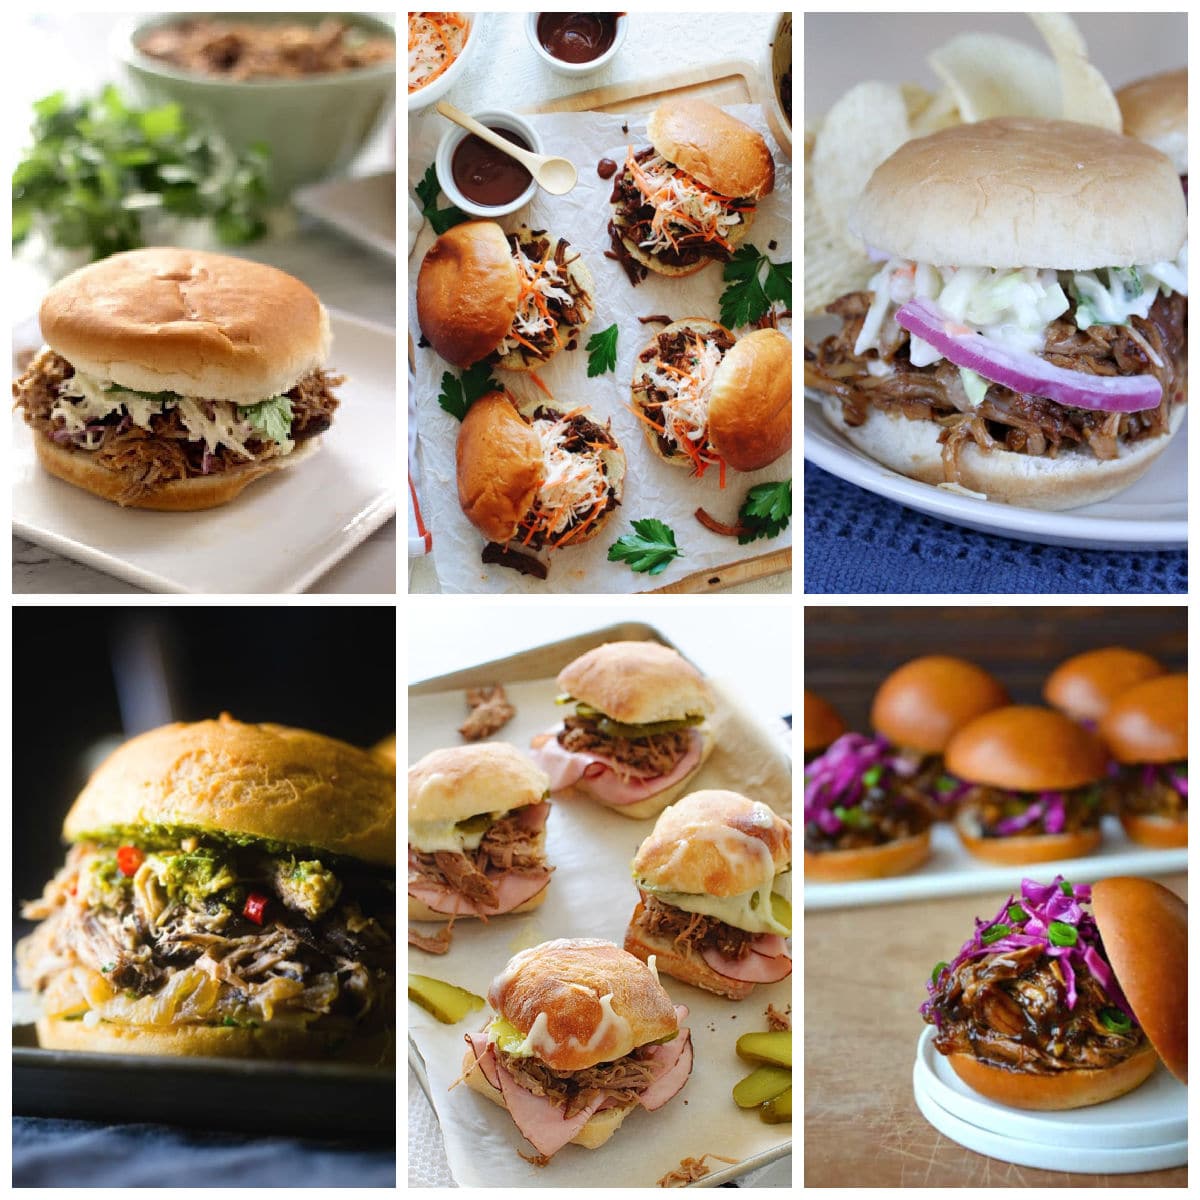 Collage image for Slow Cooker Pulled Pork Sandwiches showing featured recipes.